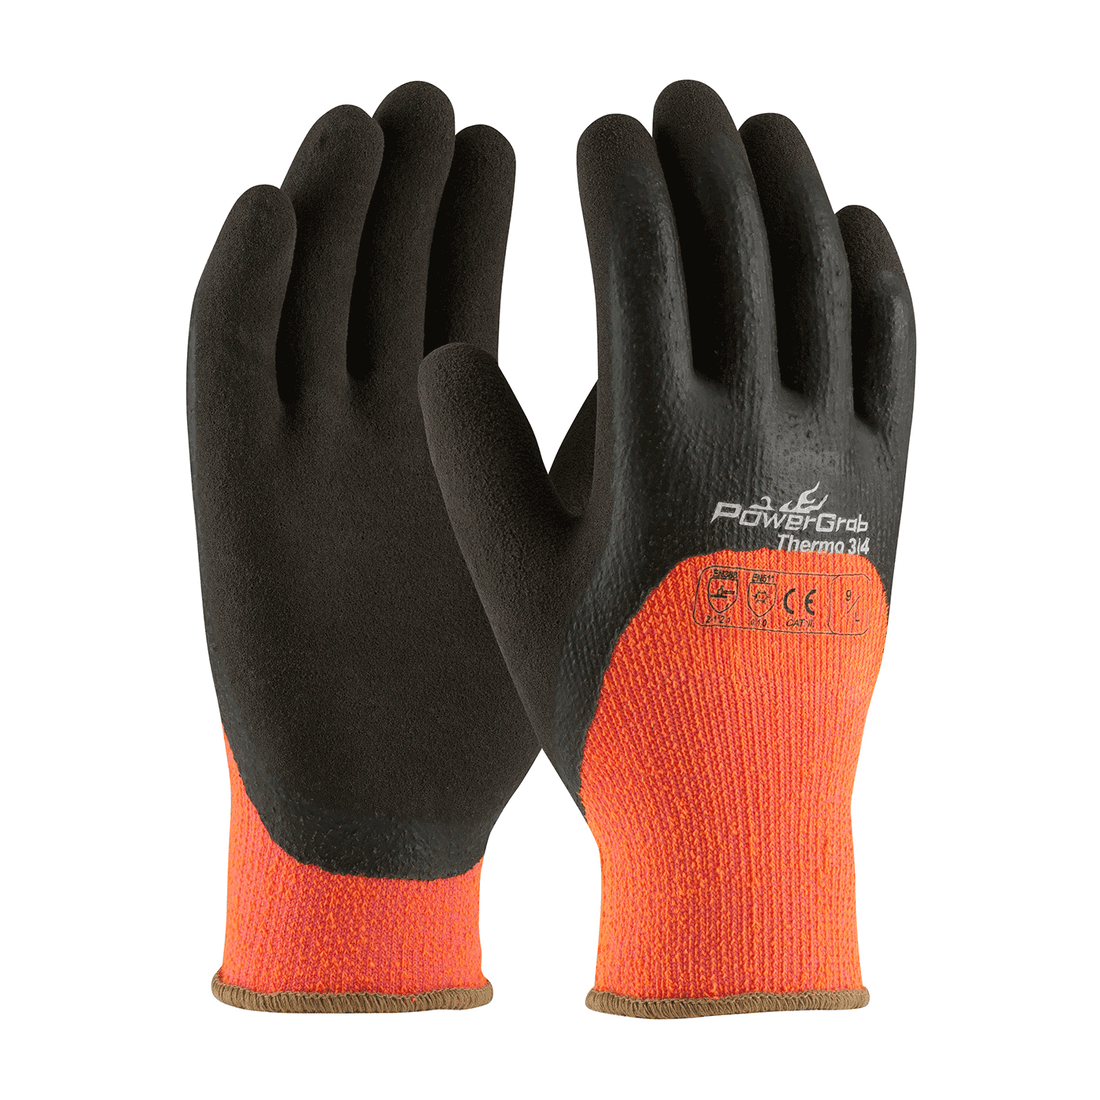 Clearing up misconceptions about cut-resistant gloves